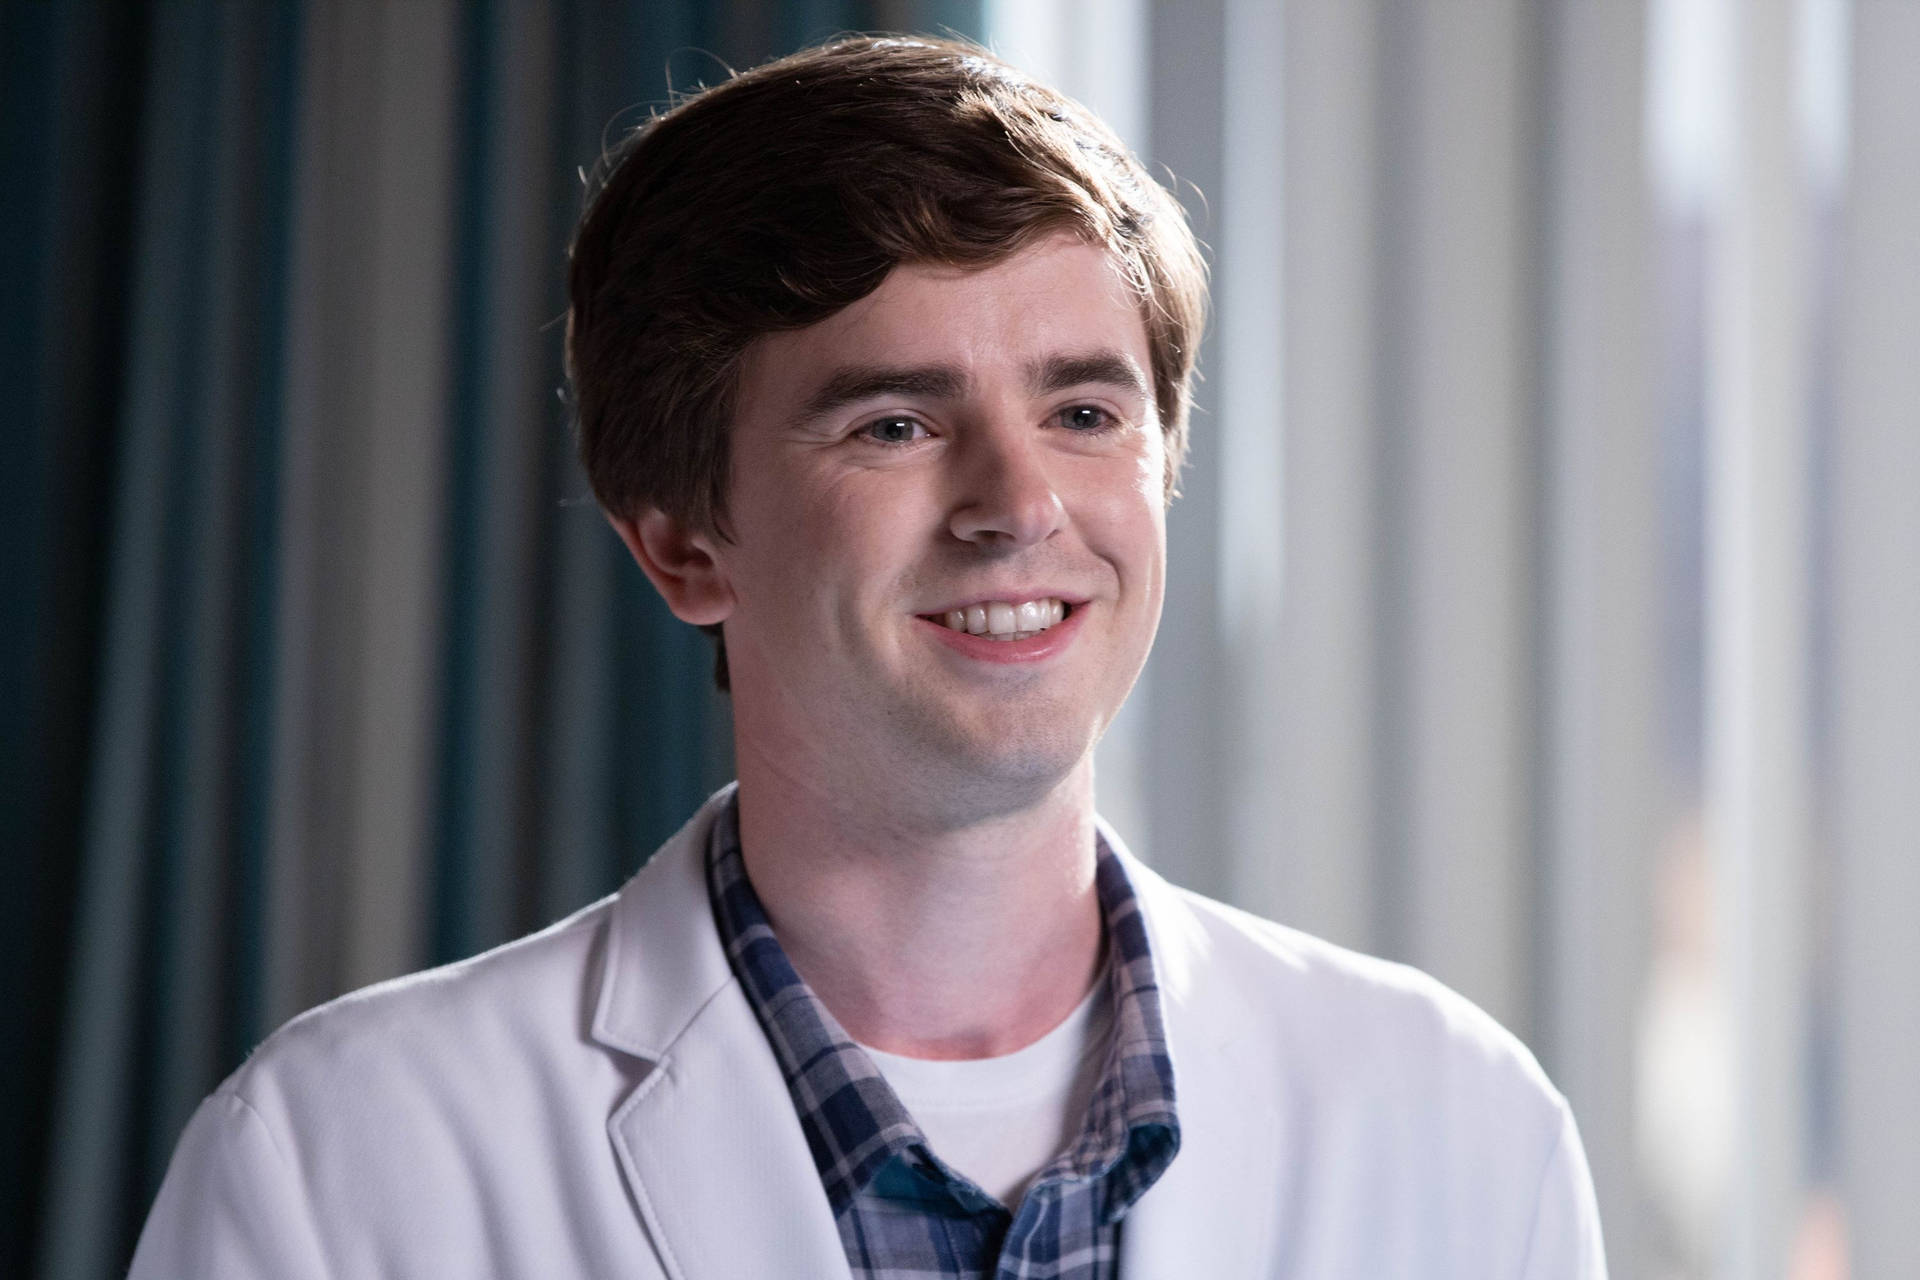 The Good Doctor Charming Smile